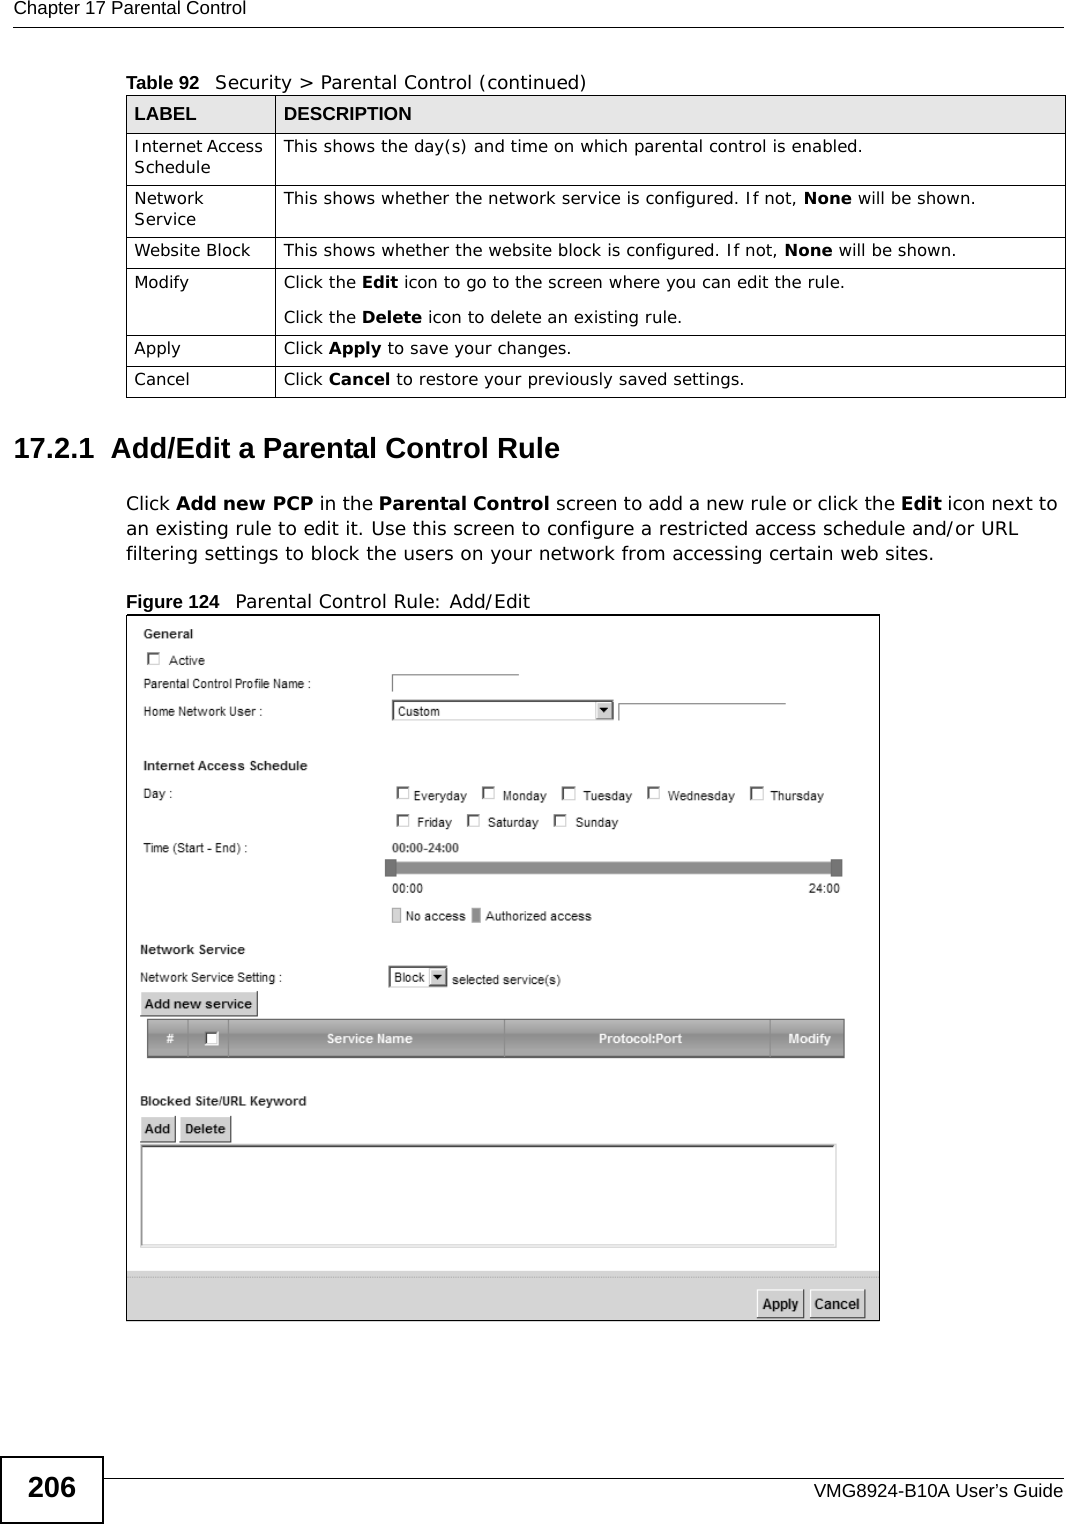 Chapter 17 Parental ControlVMG8924-B10A User’s Guide20617.2.1  Add/Edit a Parental Control RuleClick Add new PCP in the Parental Control screen to add a new rule or click the Edit icon next to an existing rule to edit it. Use this screen to configure a restricted access schedule and/or URL filtering settings to block the users on your network from accessing certain web sites.Figure 124   Parental Control Rule: Add/Edit Internet Access Schedule This shows the day(s) and time on which parental control is enabled.Network Service This shows whether the network service is configured. If not, None will be shown.Website Block This shows whether the website block is configured. If not, None will be shown.Modify Click the Edit icon to go to the screen where you can edit the rule.Click the Delete icon to delete an existing rule.Apply Click Apply to save your changes.Cancel Click Cancel to restore your previously saved settings.Table 92   Security &gt; Parental Control (continued)LABEL DESCRIPTION